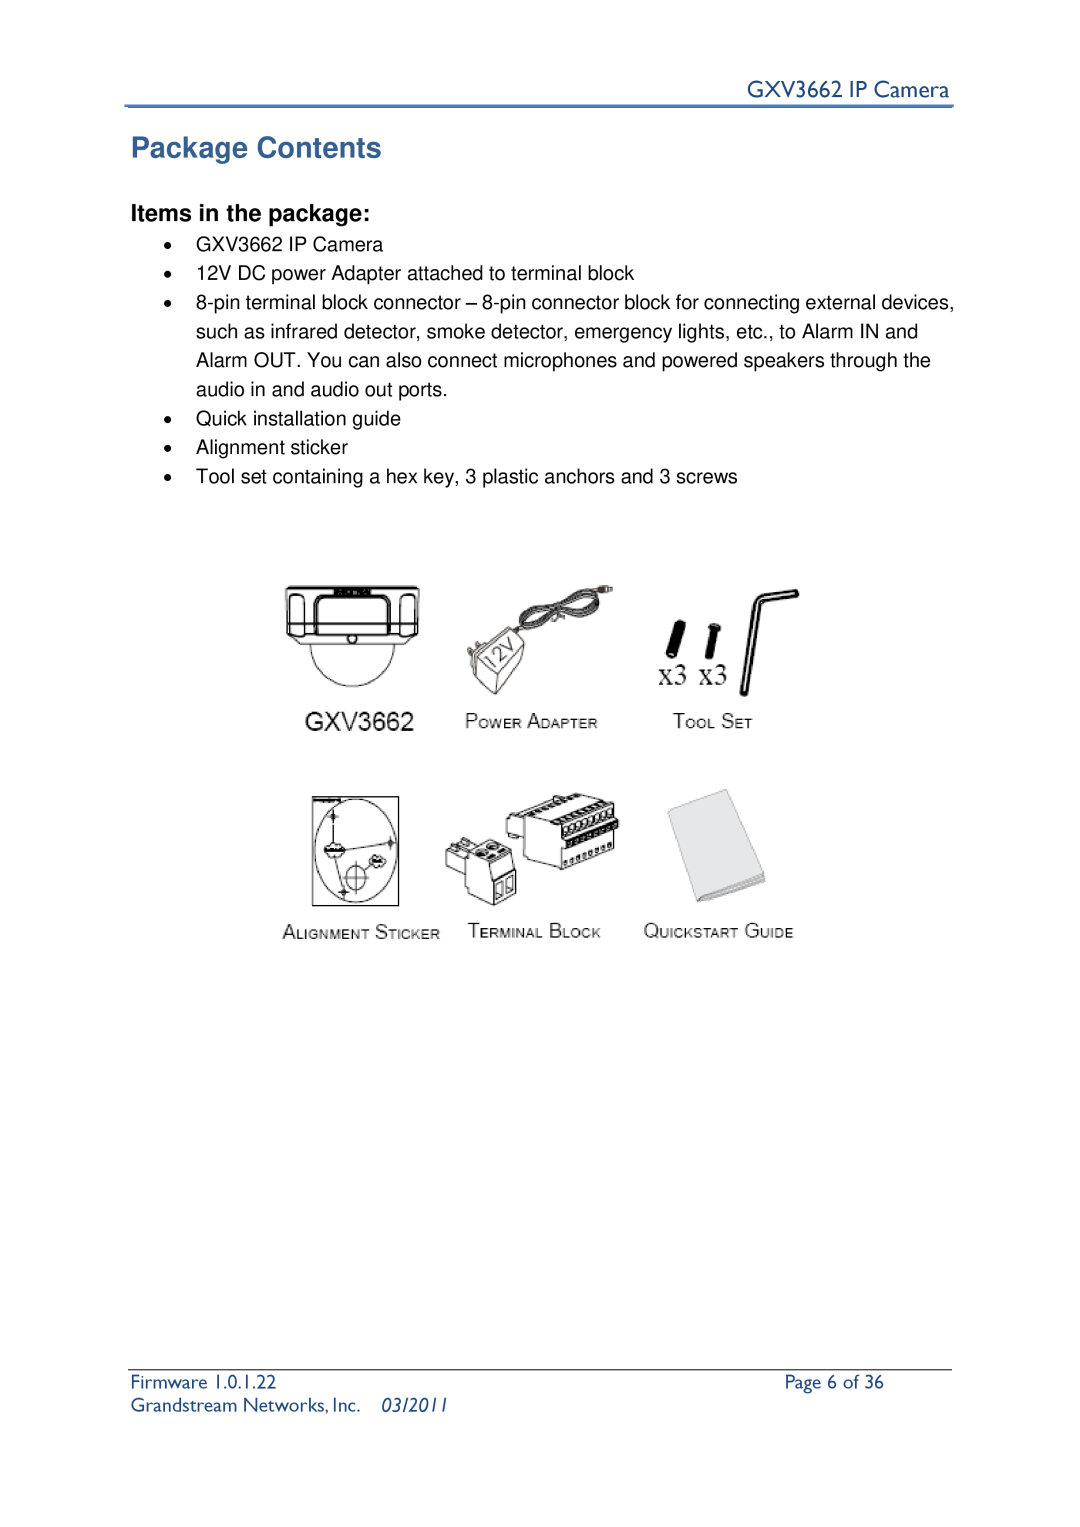 Grandstream Networks user manual Package Contents, Page 6 of, GXV3662 IP Camera, Items in the package, Firmware, 03/2011 